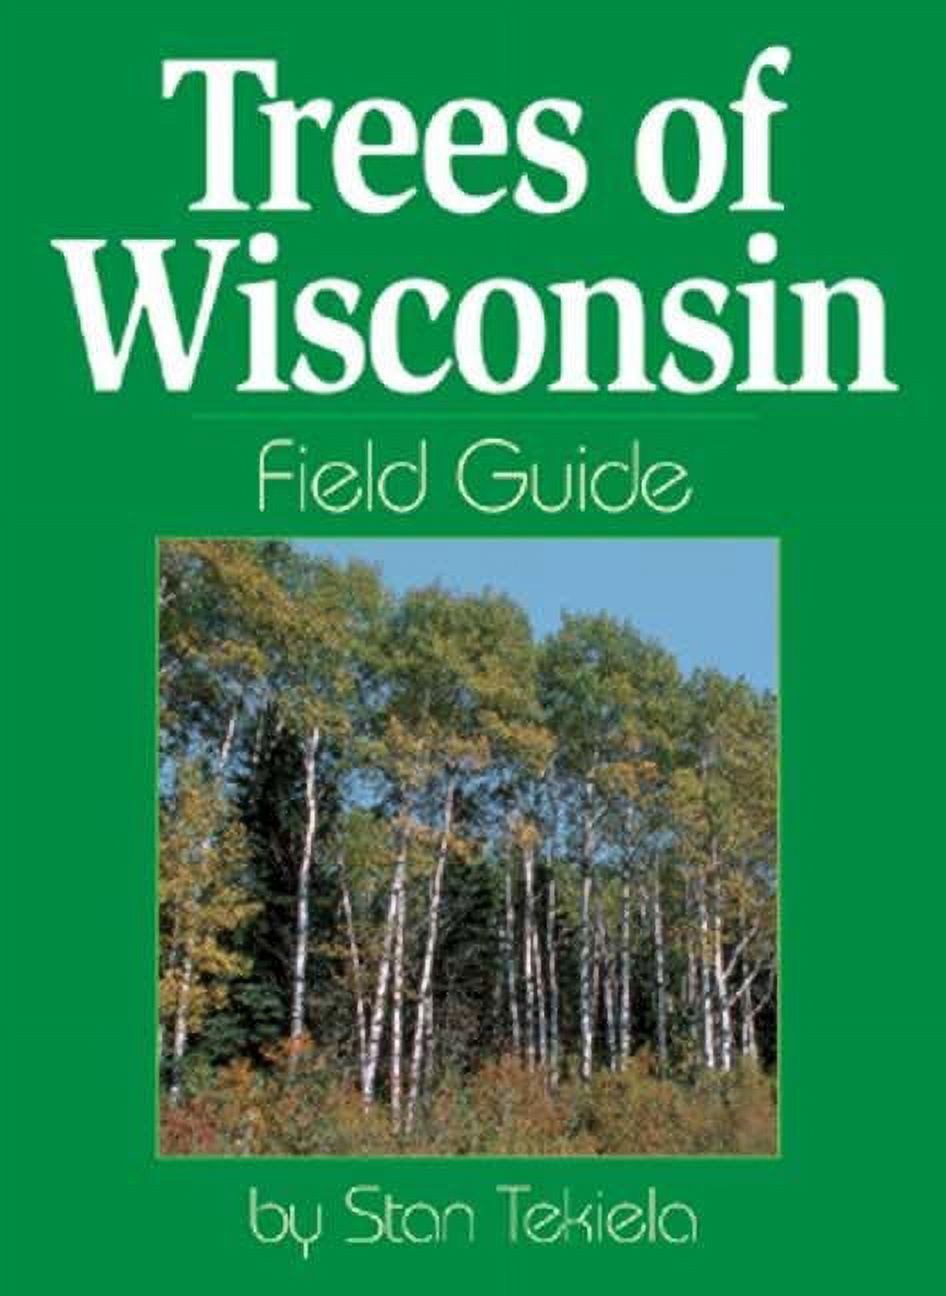 Tree Identification Guides: Trees of Wisconsin Field Guide (Paperback ...